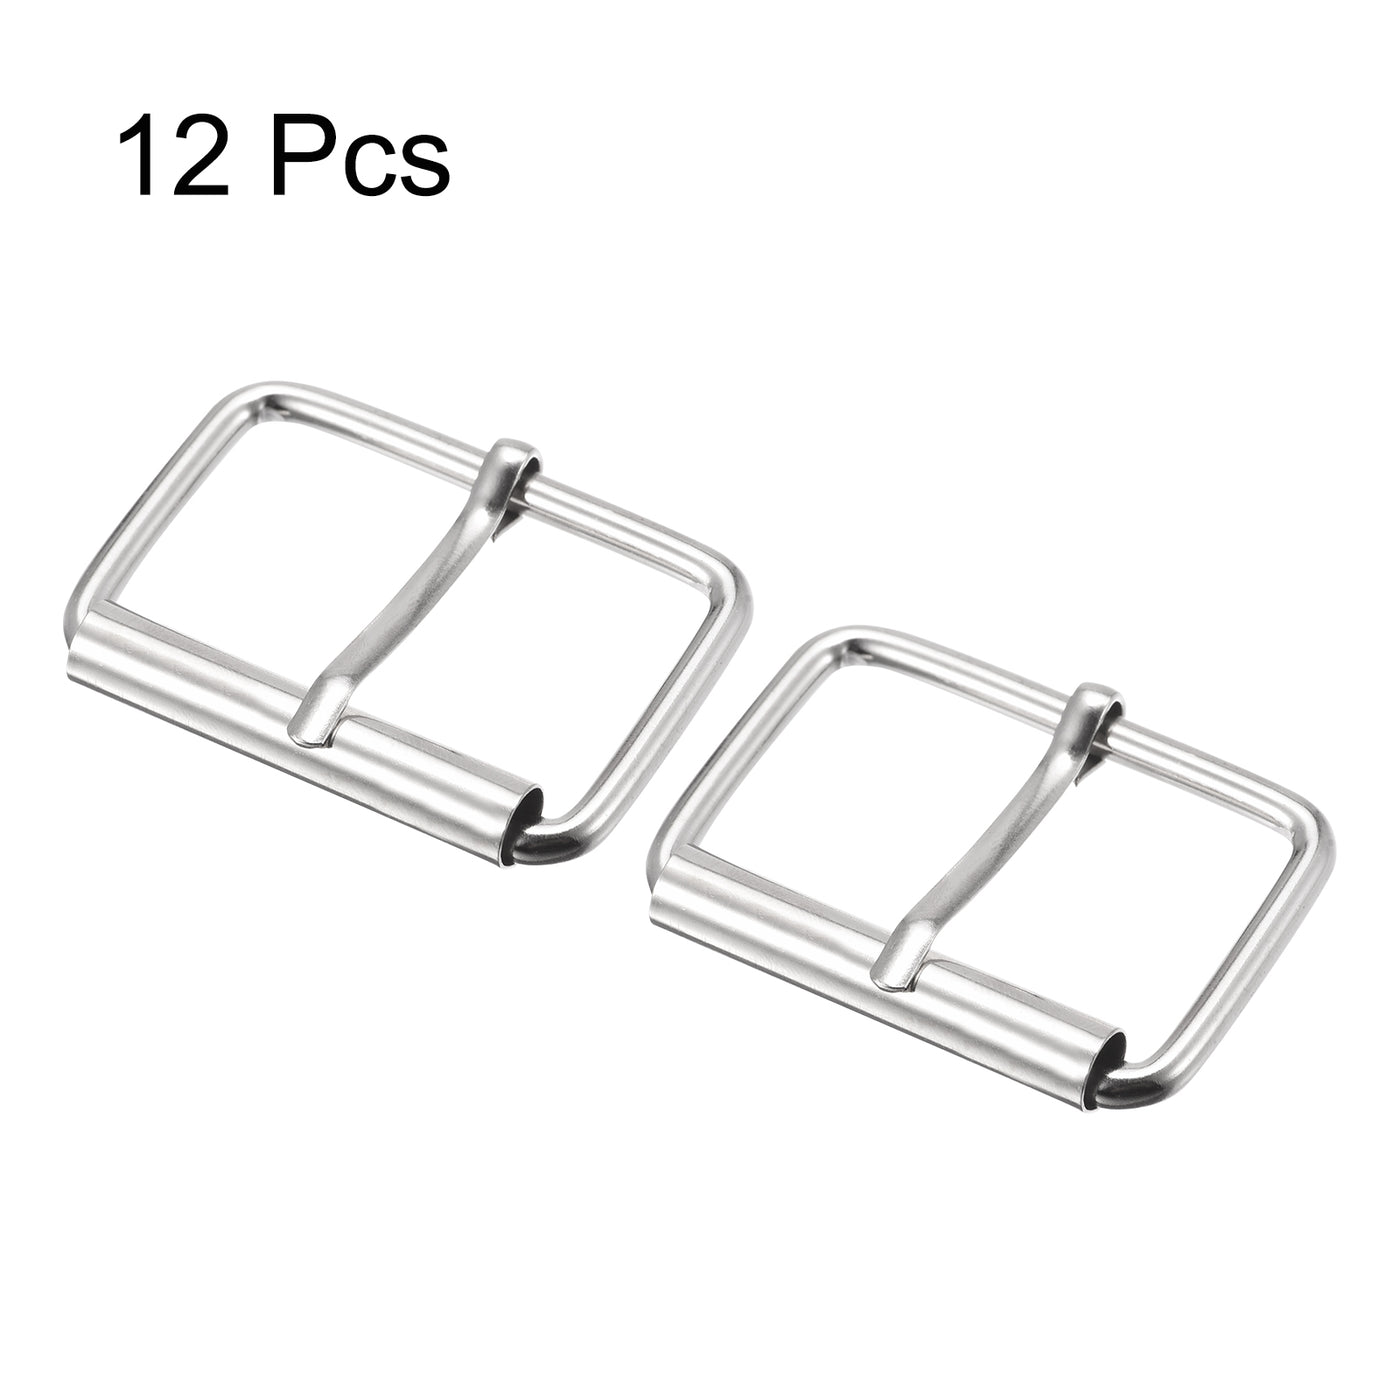 uxcell Uxcell 40mm(1.57") Metal Roller Buckles for Belts Bags Straps DIY Silver Tone 12pcs